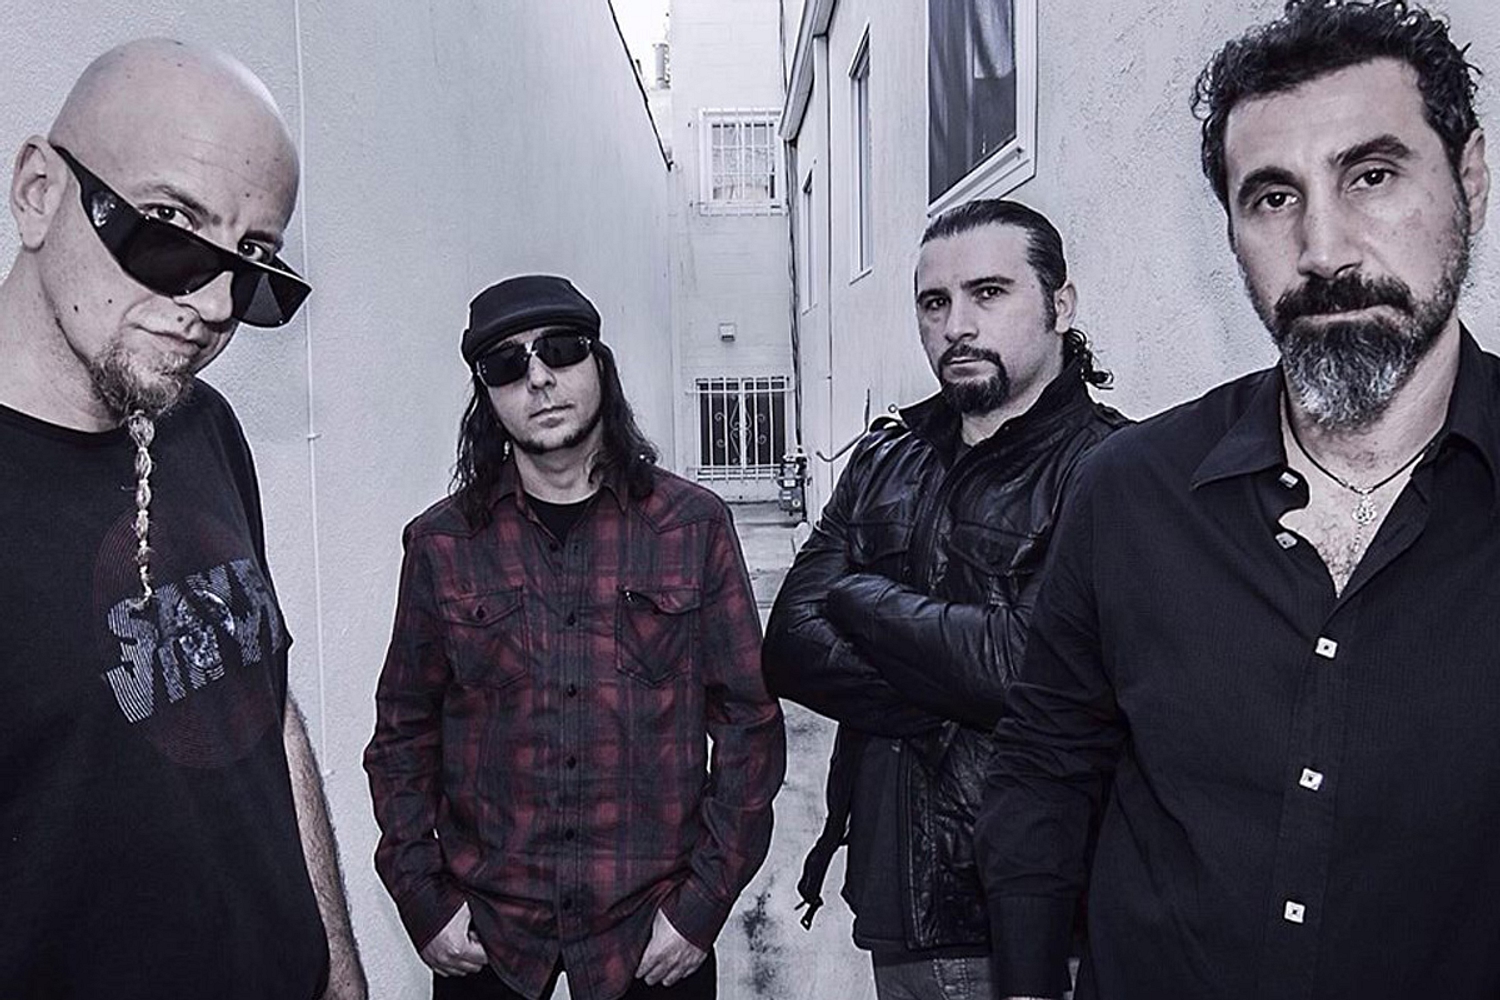 A new System of a Down album could be in the works